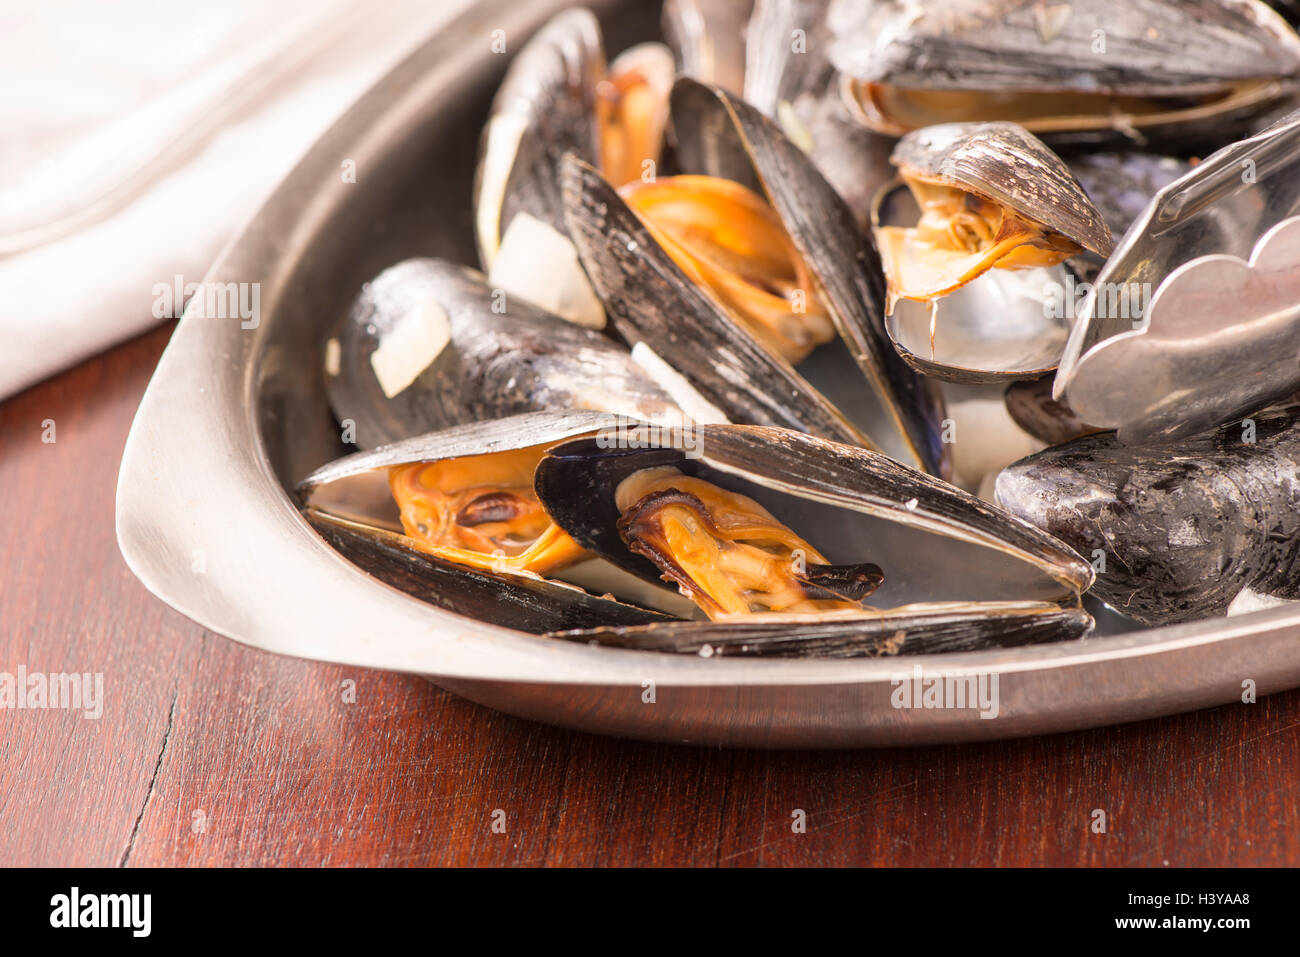 Roasted clams in close up. Seafood dish served. Rustic gourmet shellfish dinner. Stock Photo